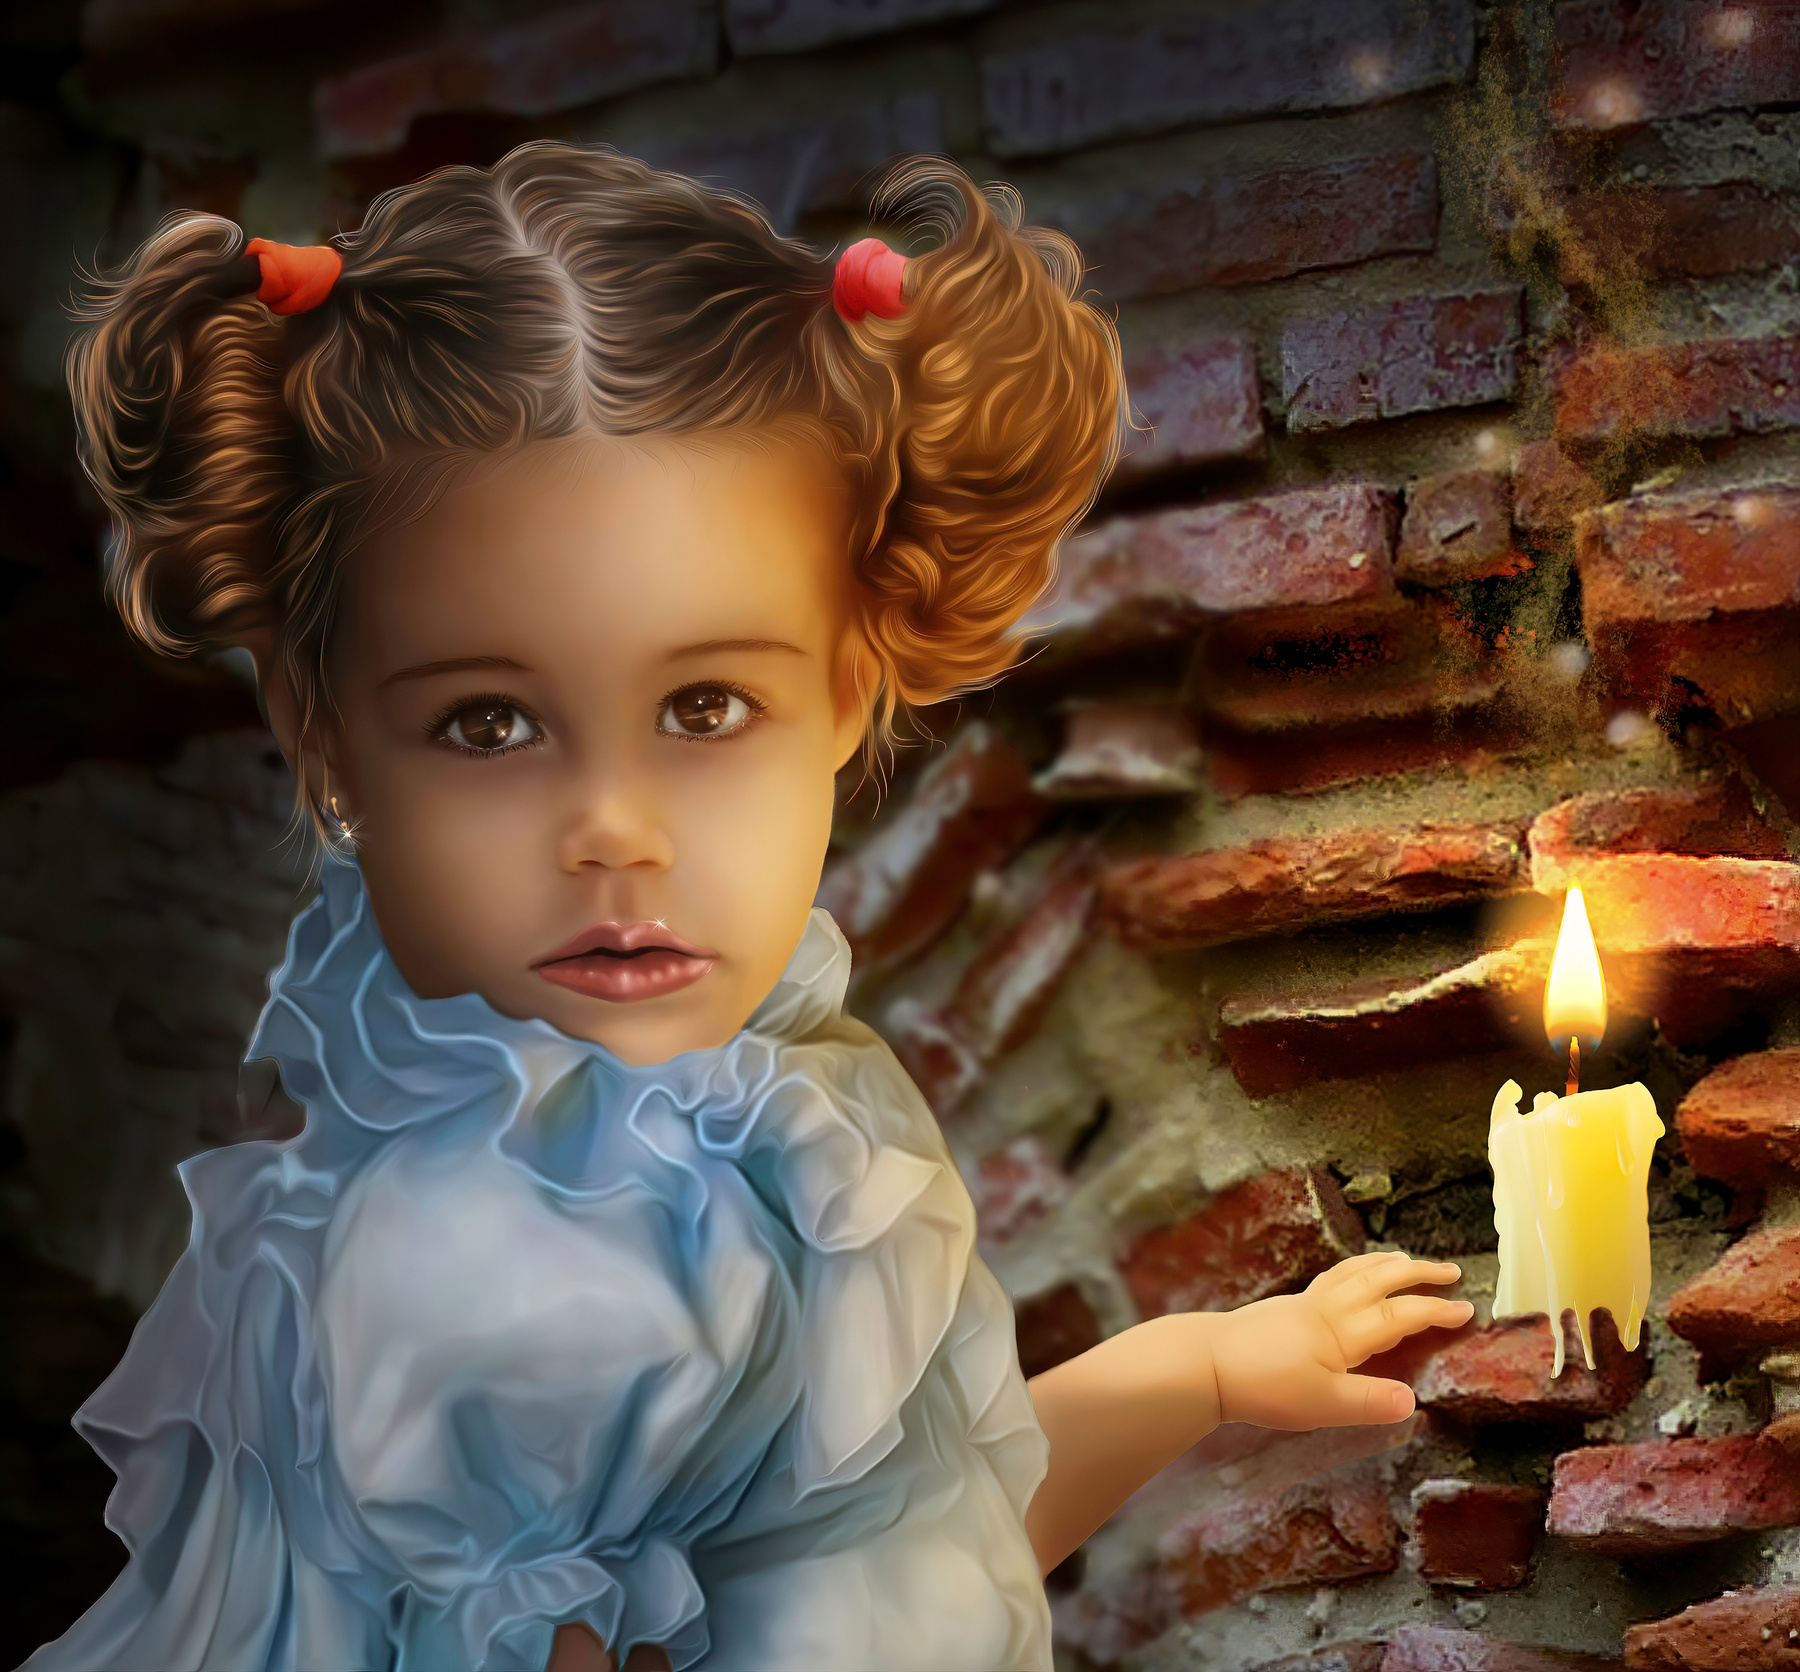 Little princess by the candle. magic curly night burning child illustration light cute dress girl little fantasy imagination drawing candid childhood carefree fear loneliness mystery privacy solitude teenager funny terrified twilight fairy tale dark vibrant color lamp castle old